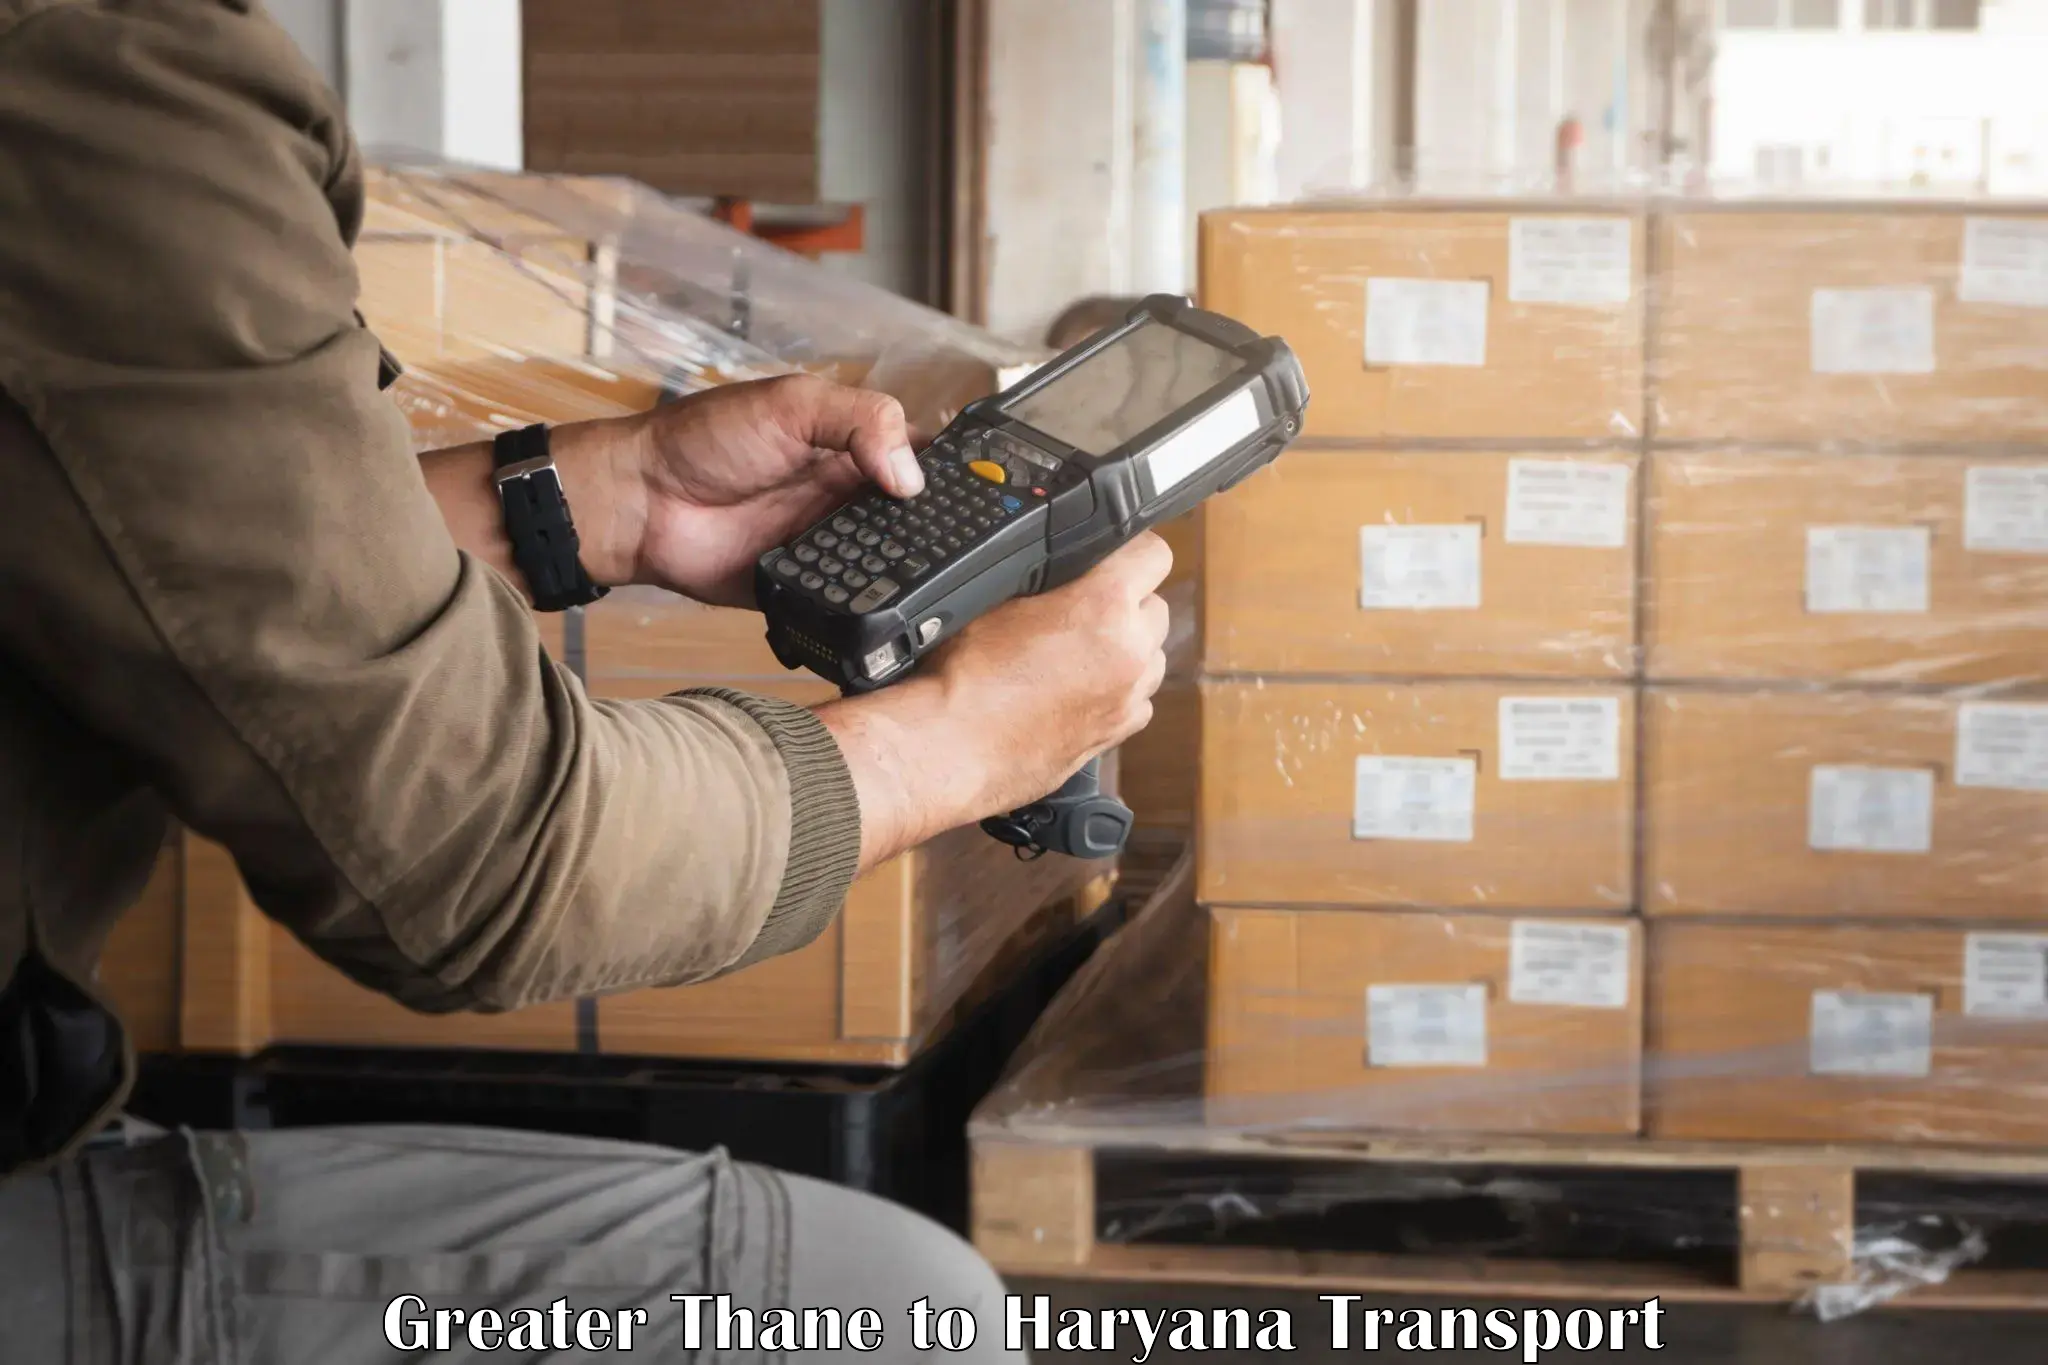 Container transport service Greater Thane to Haryana